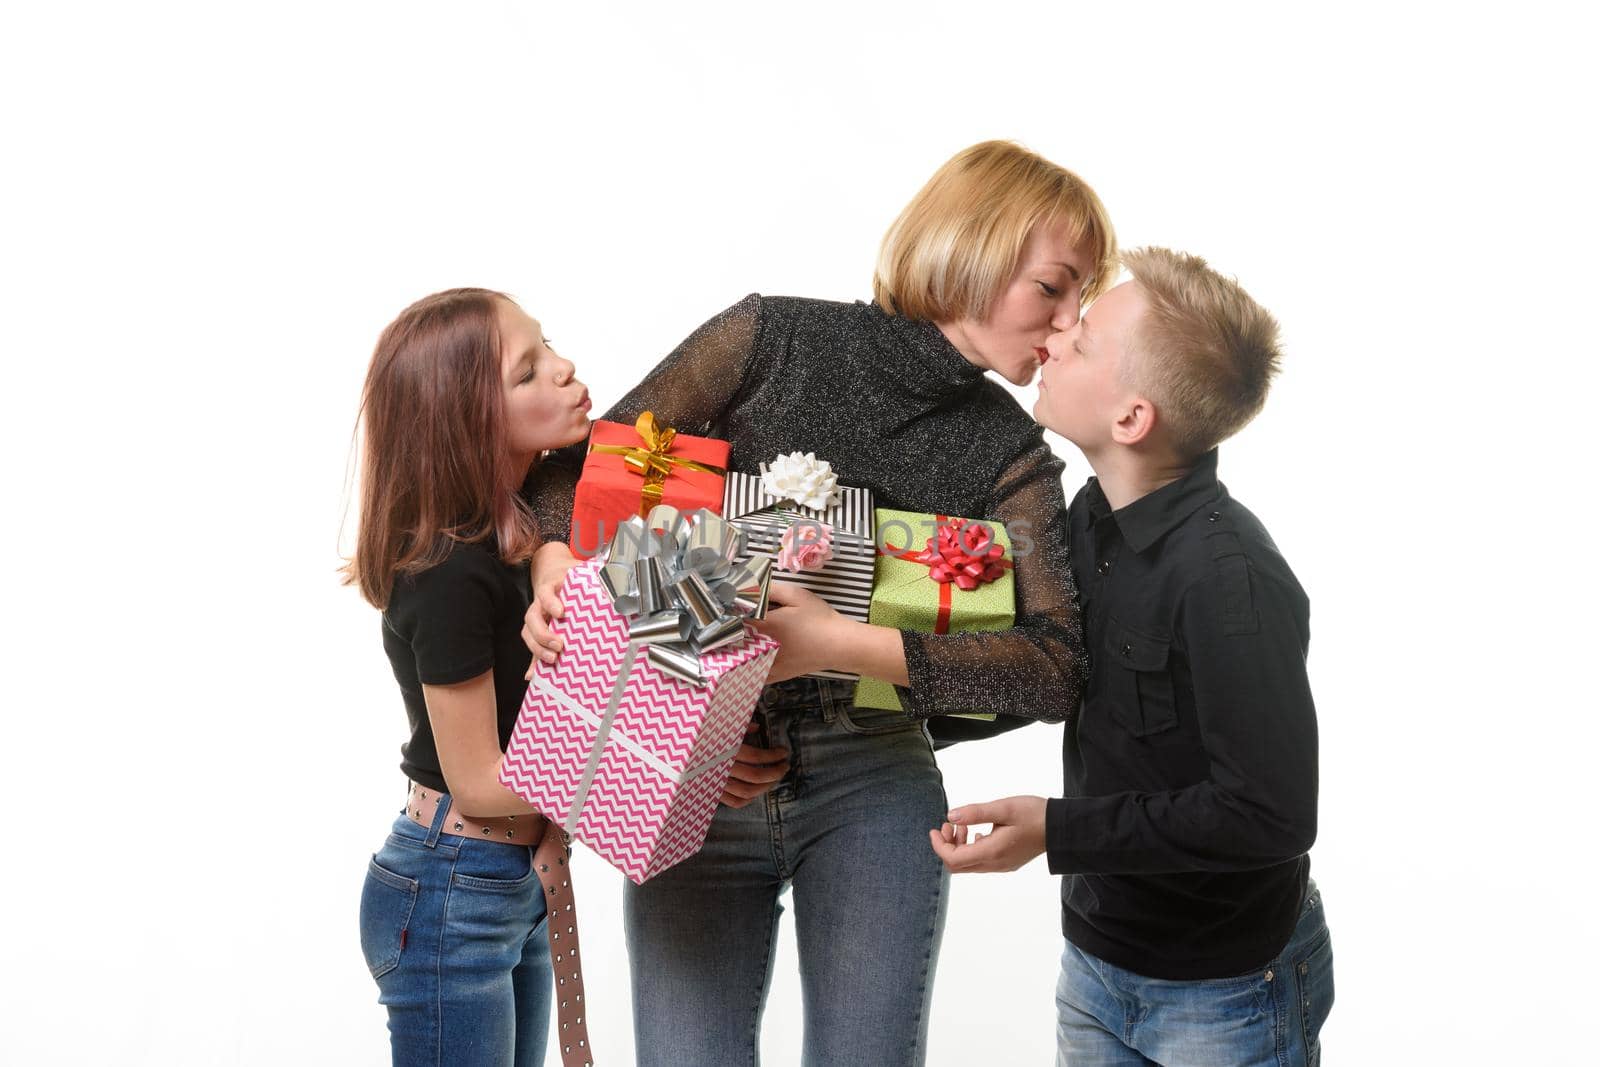 Children congratulated mom on her birthday and gave gifts, mom kisses her son as a token of gratitude